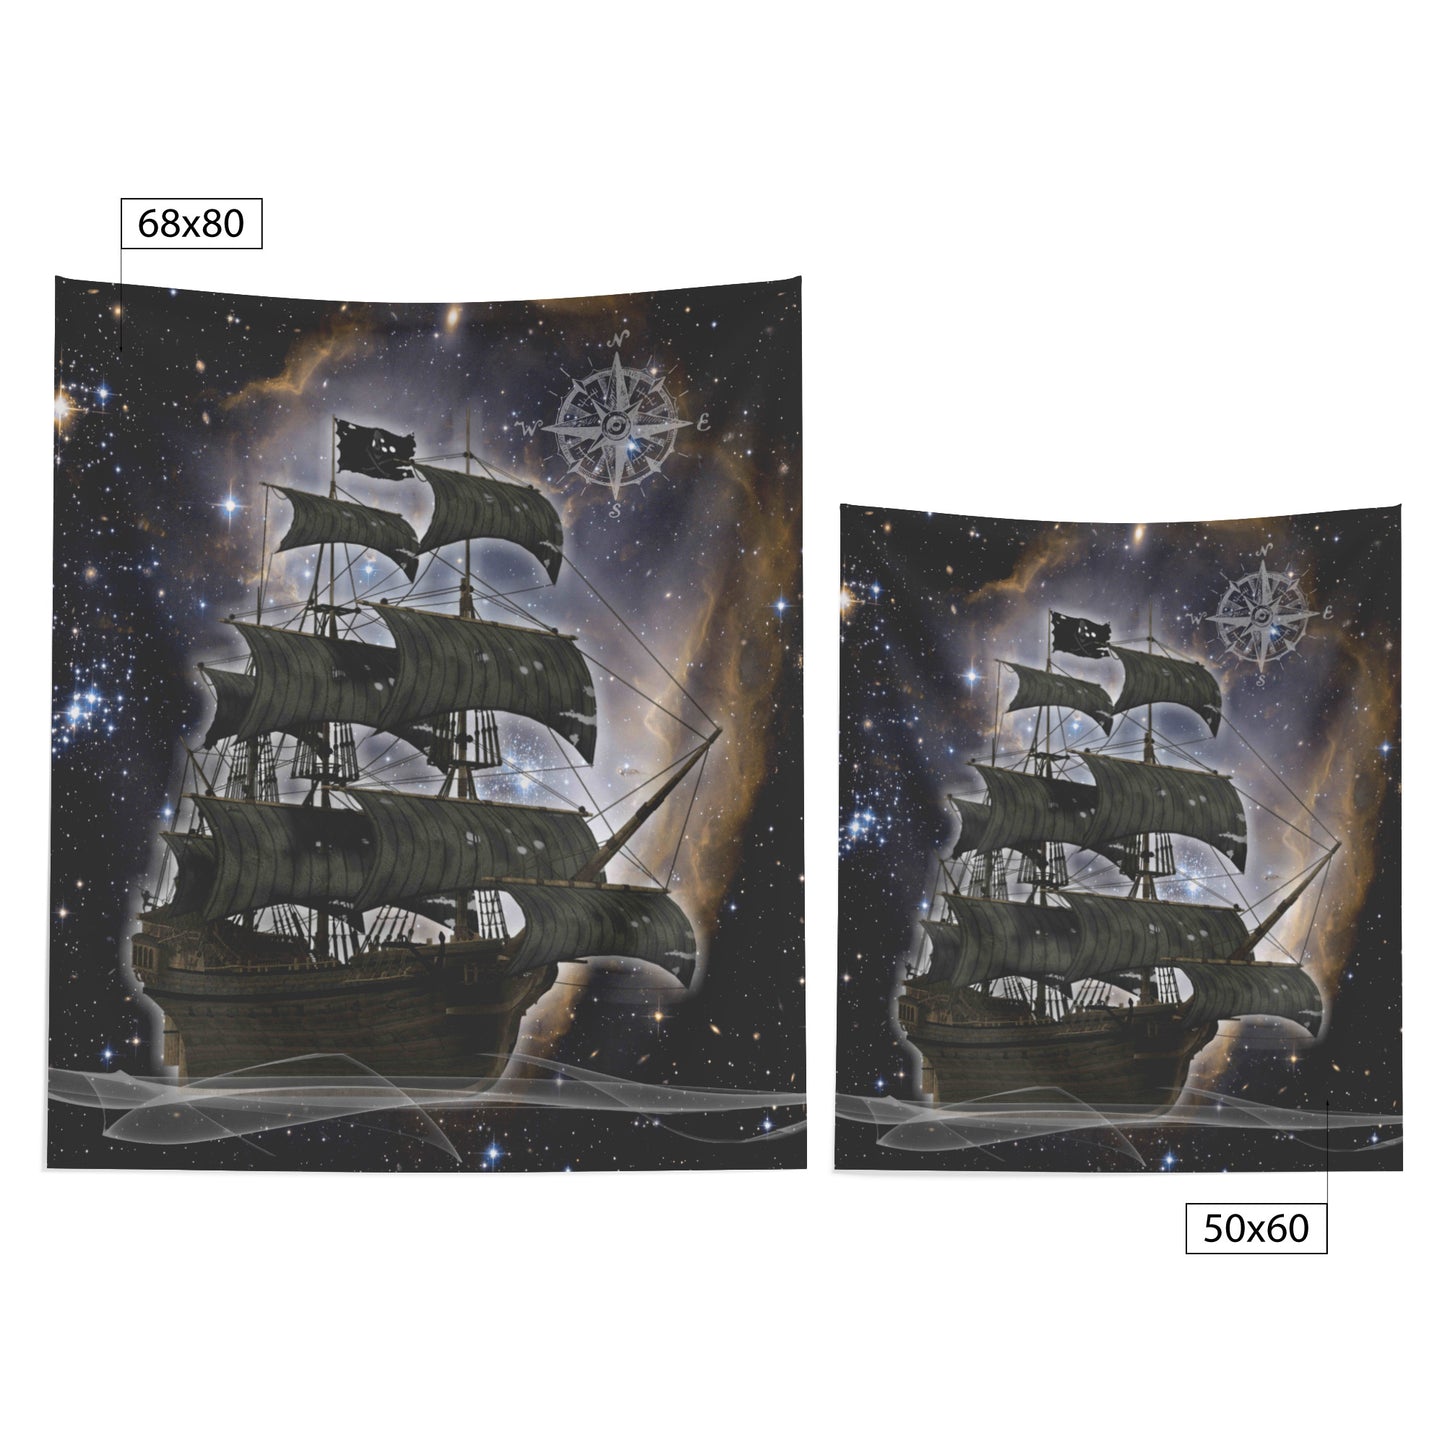 Pirate Ghost Ship Wall Hanging - Black